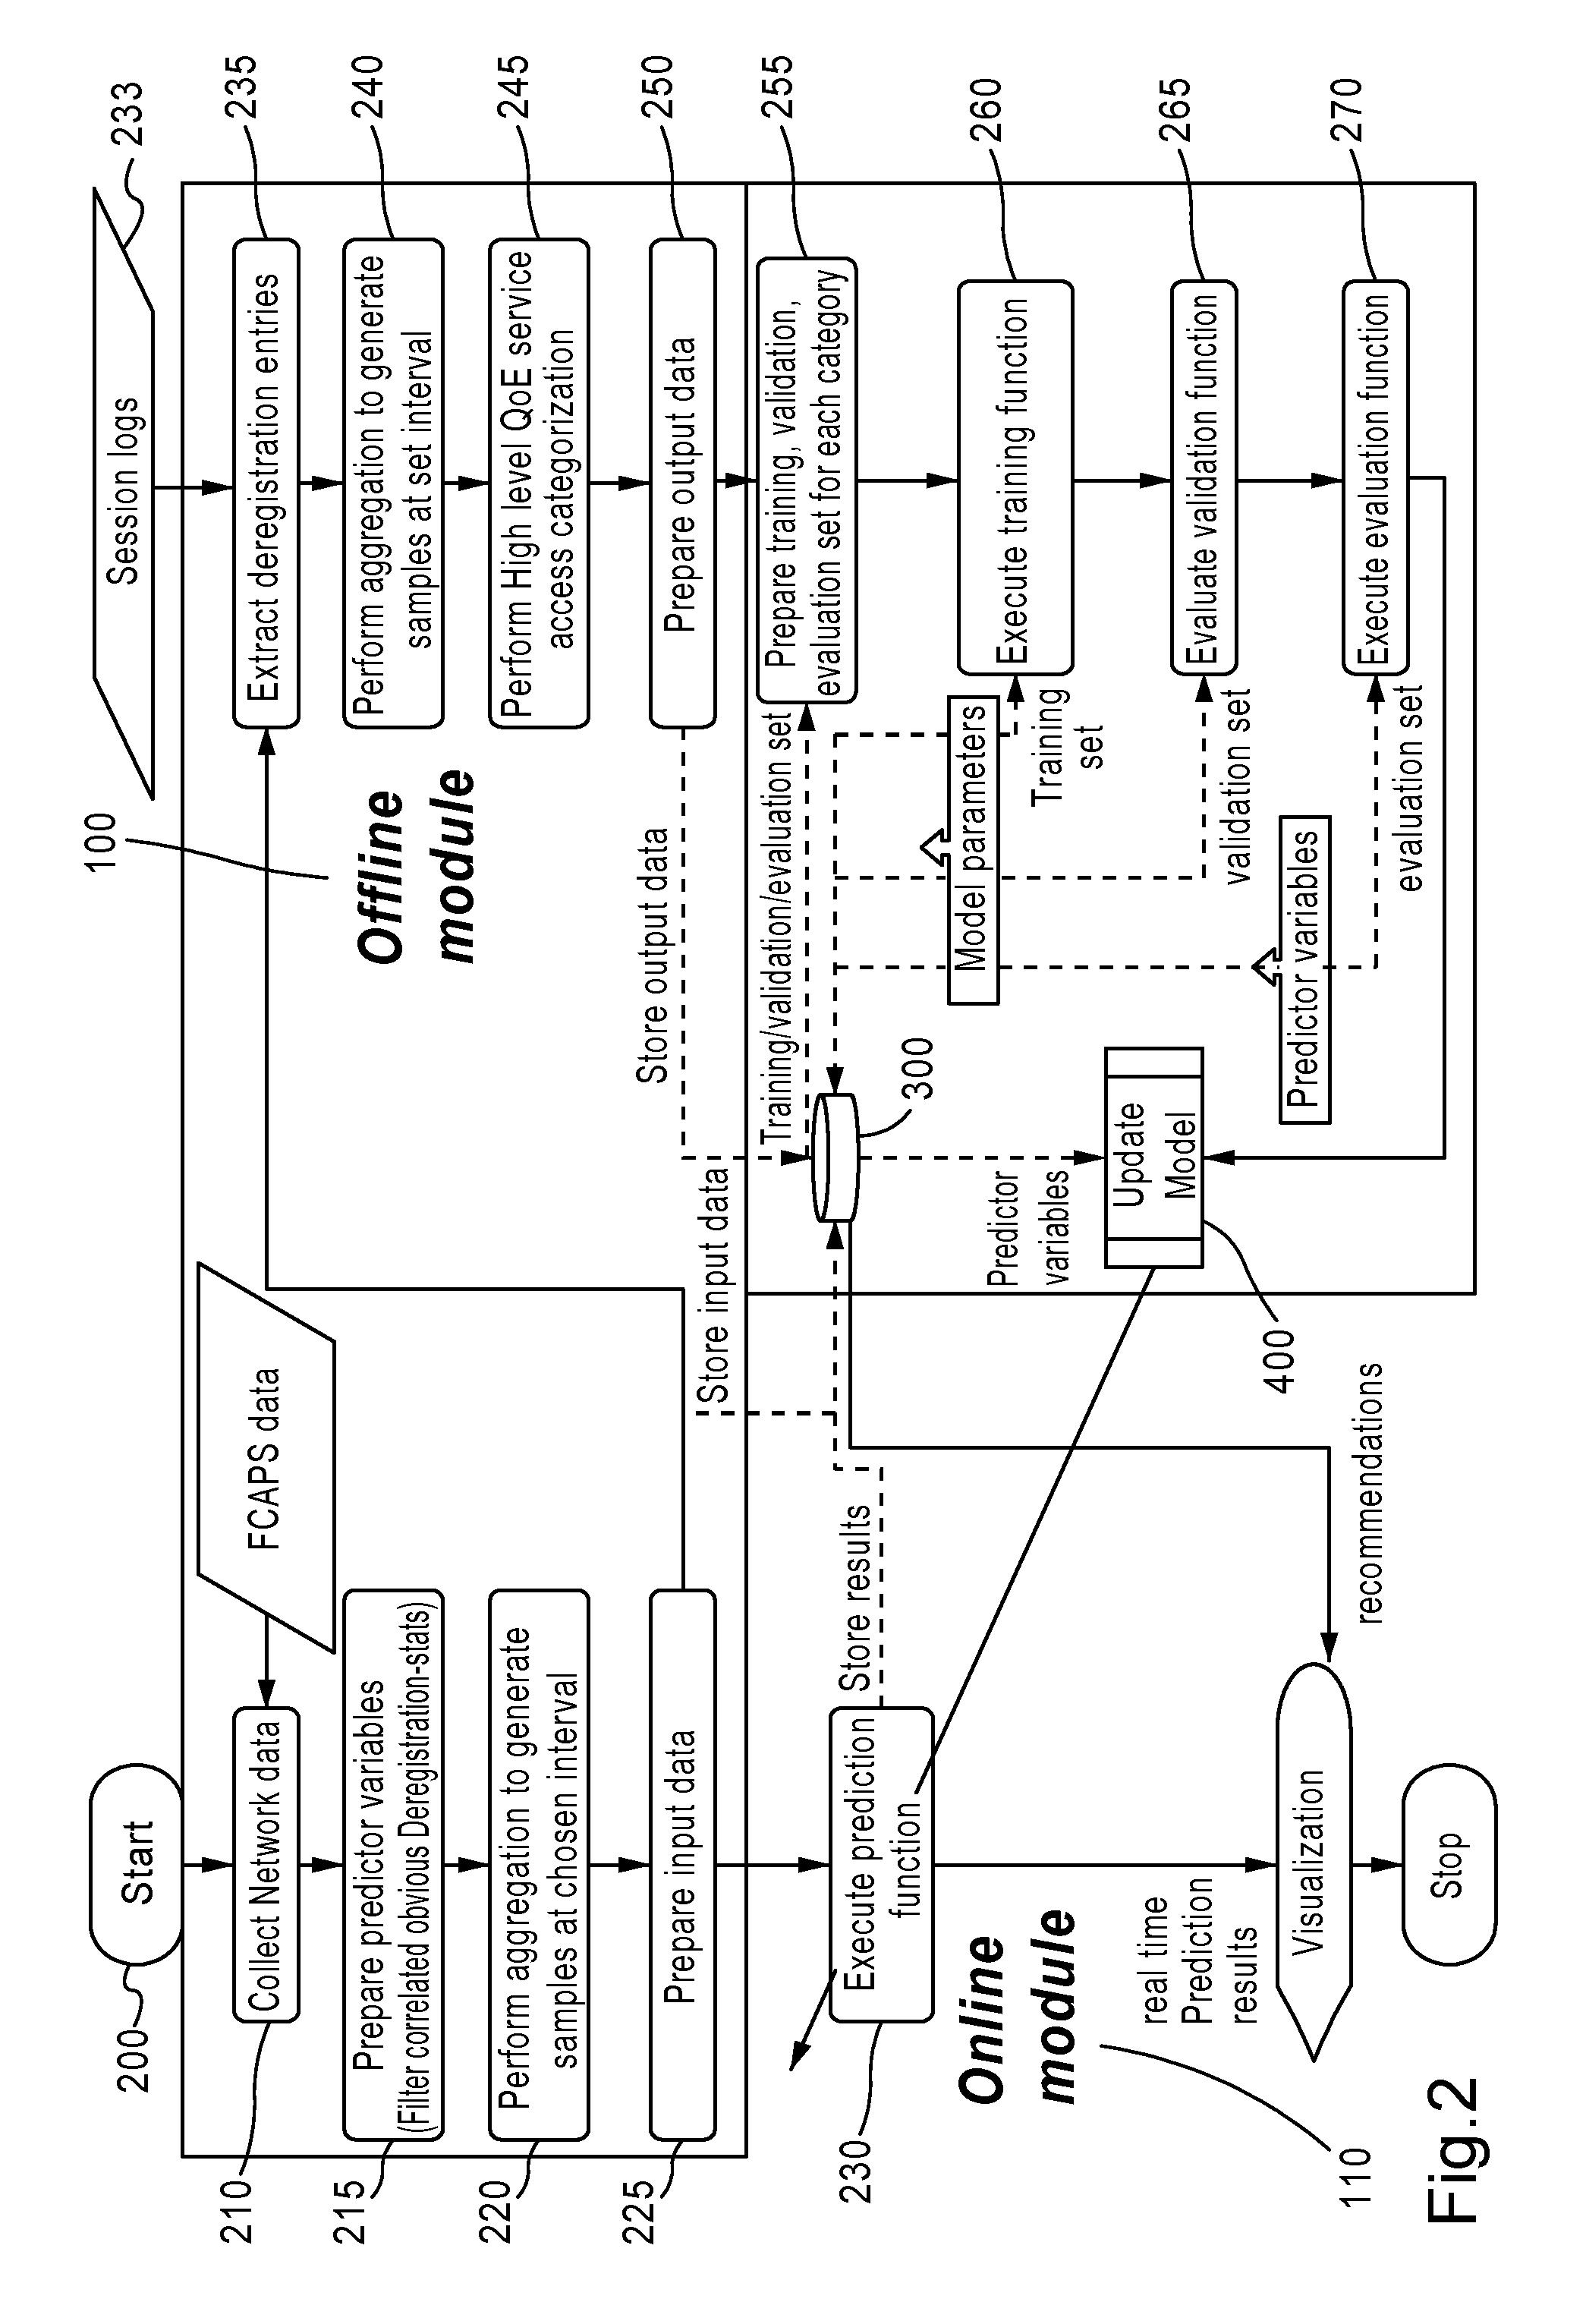 Method and system for prediction and root cause recommendations of service access quality of experience issues in communication networks